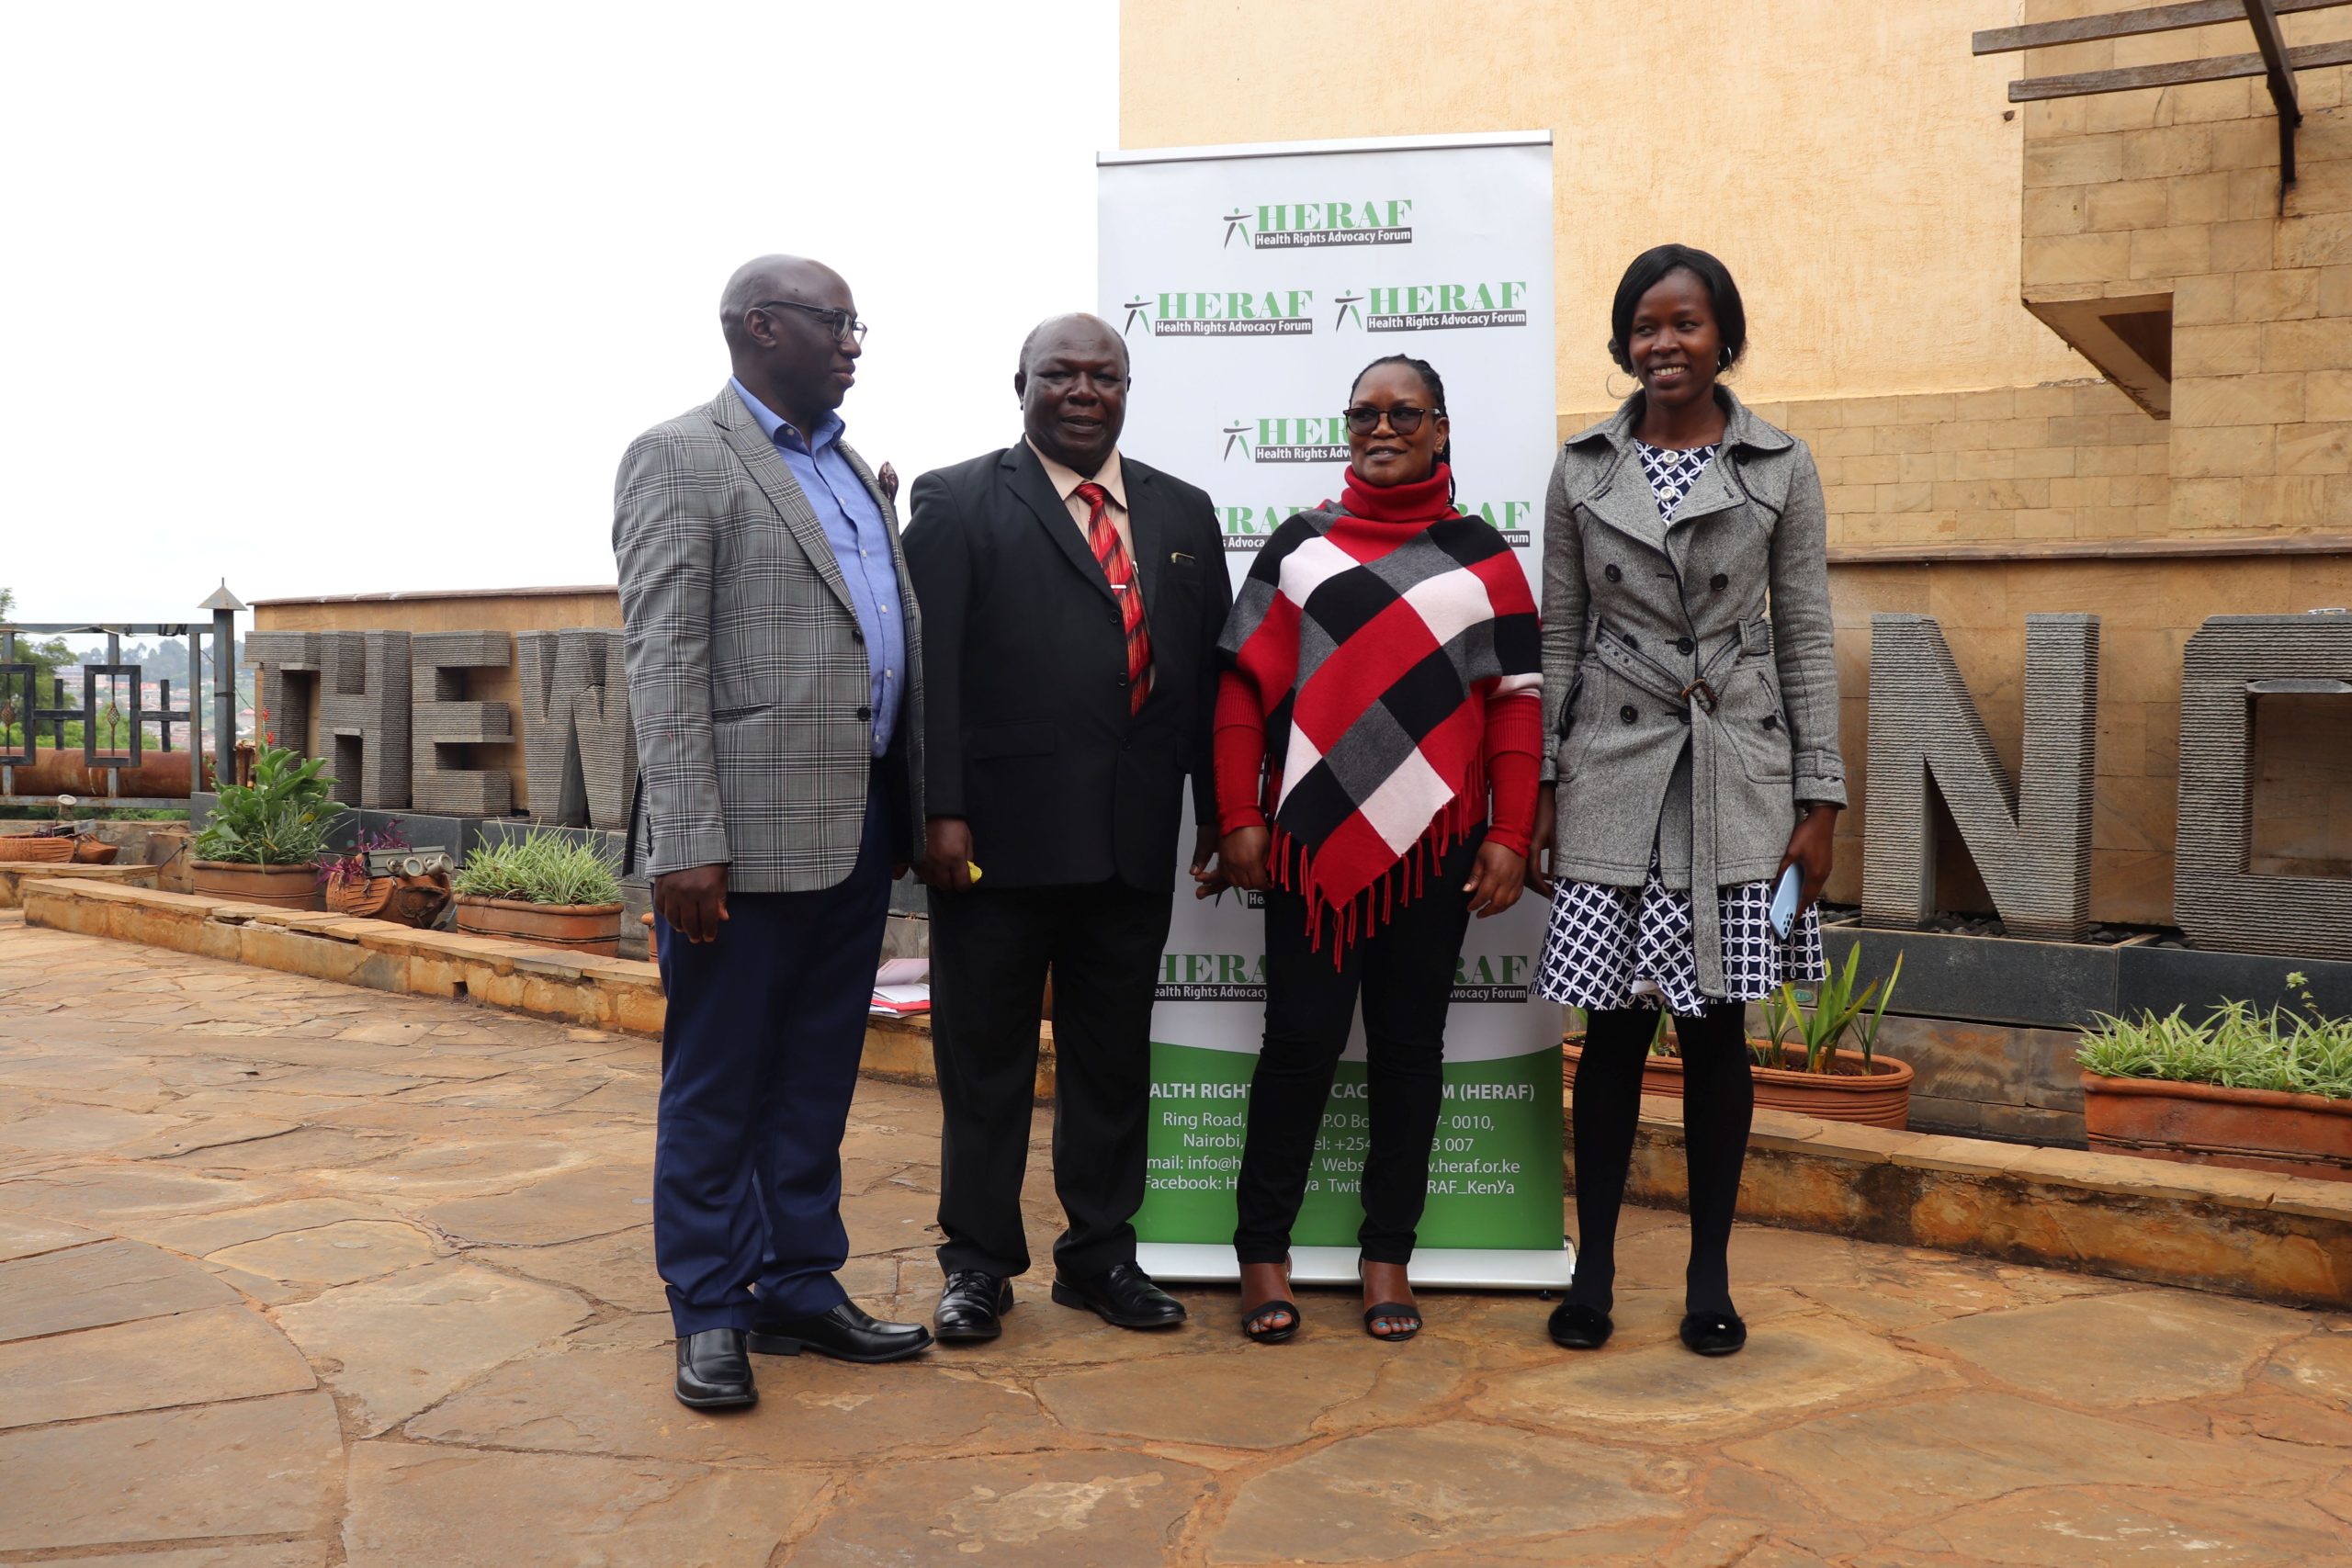 Nyeri County Costed Mental Health Action Plan Launch